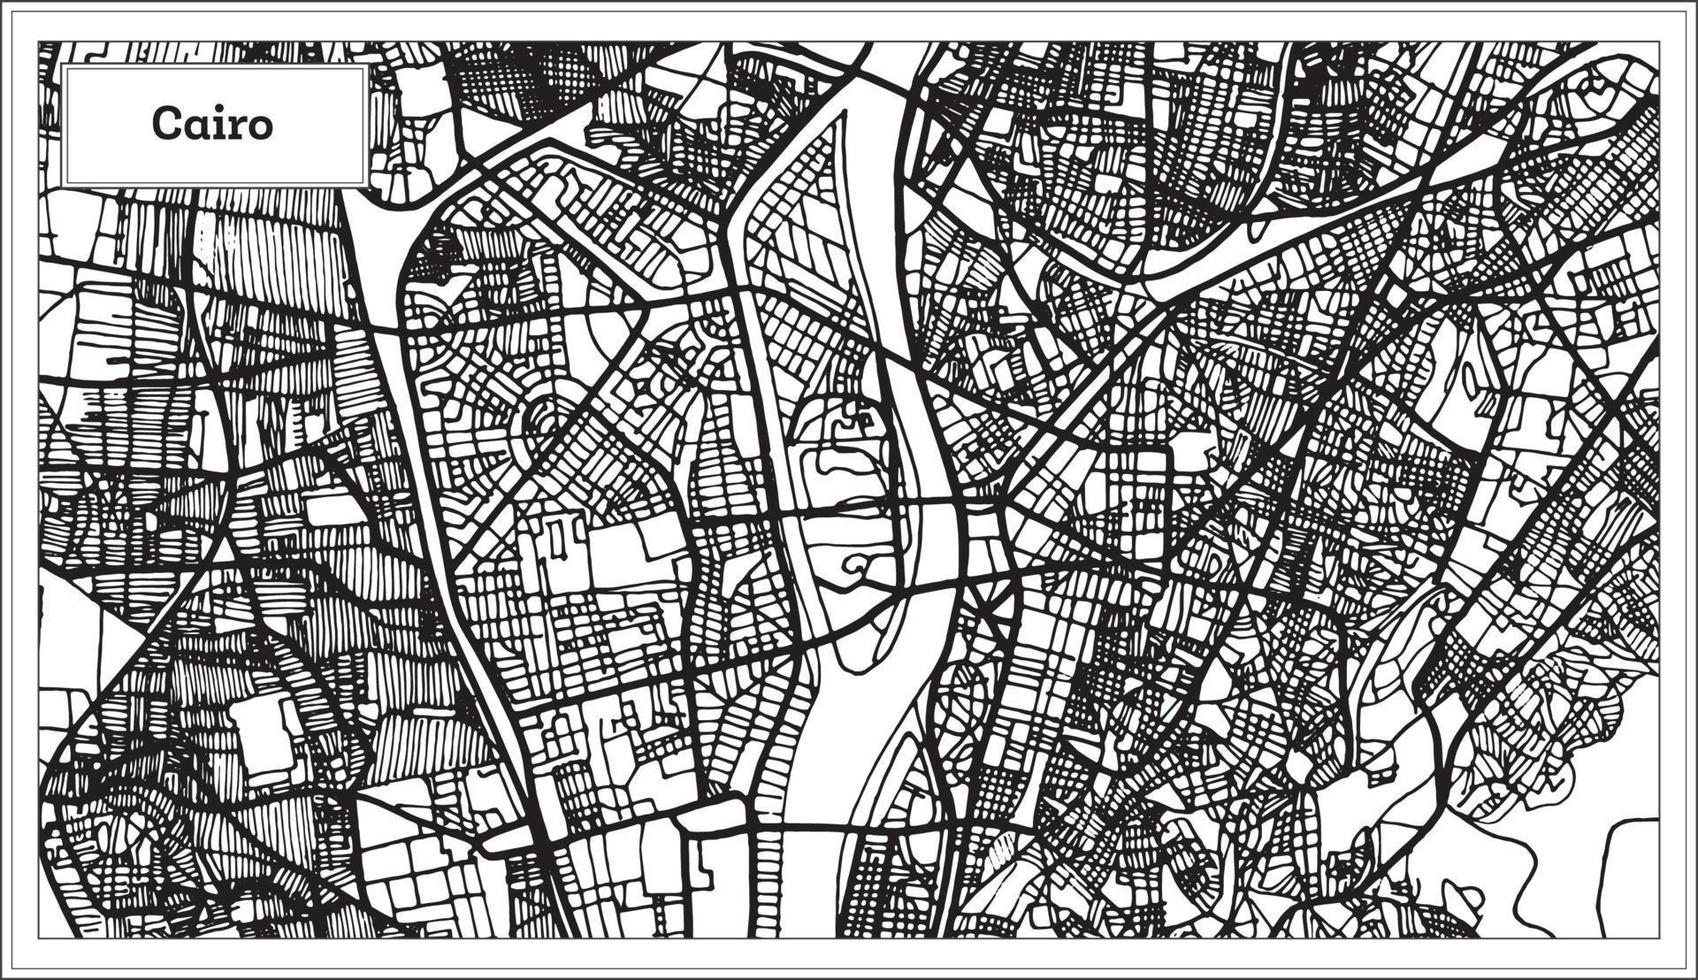 Cairo Egypt City Map in Black and White Color. vector